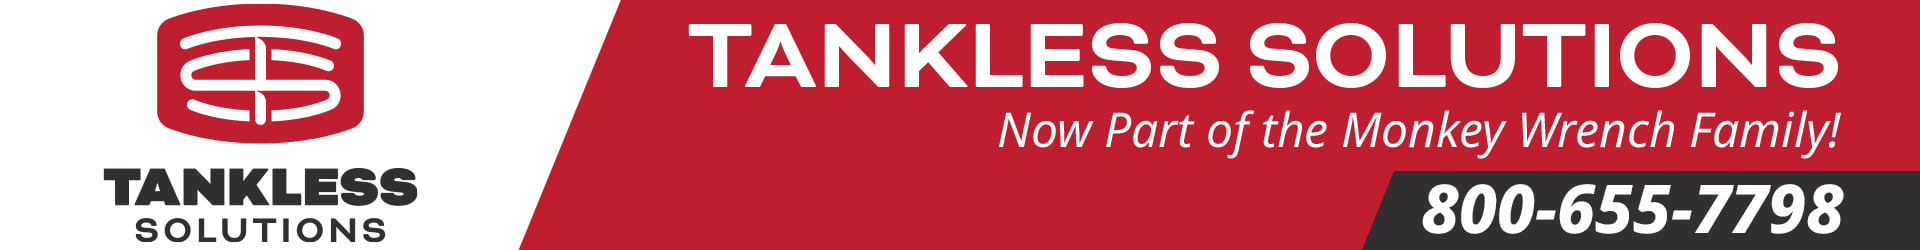 Tankless-Solutions-banner